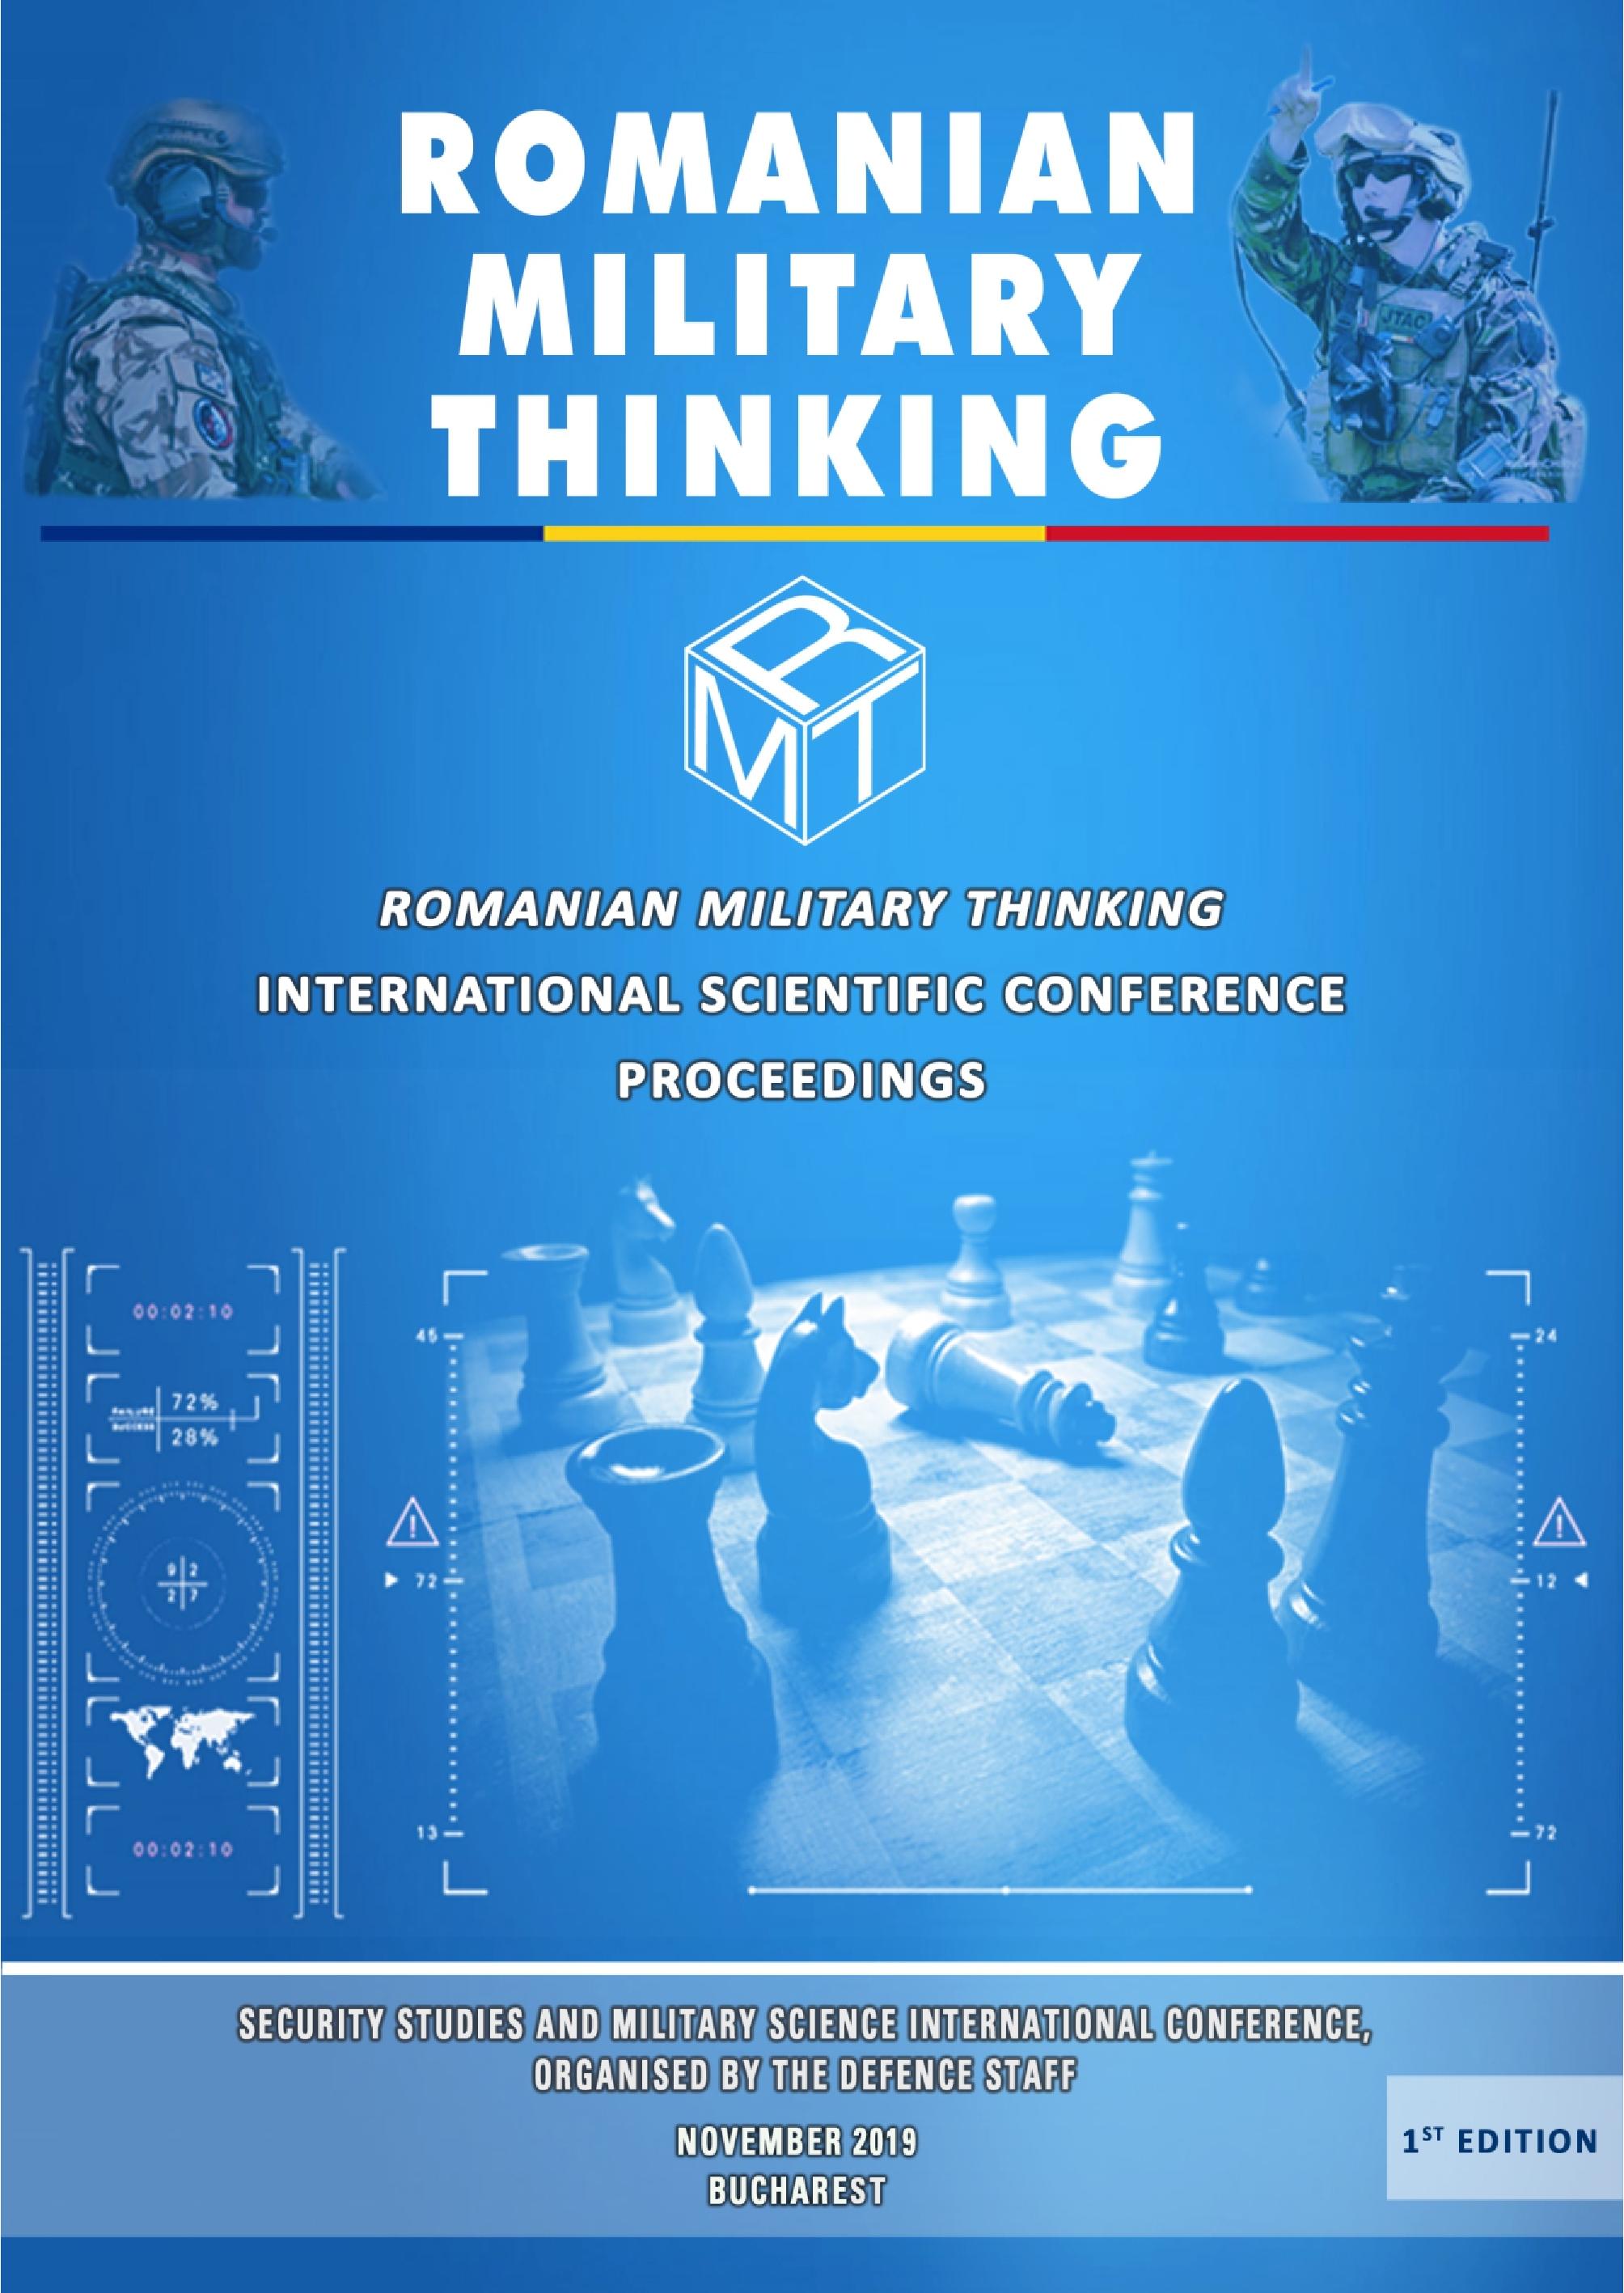 Romanian Military Thinking Conference Proceedings - Plenary Sessions Synthesis Cover Image